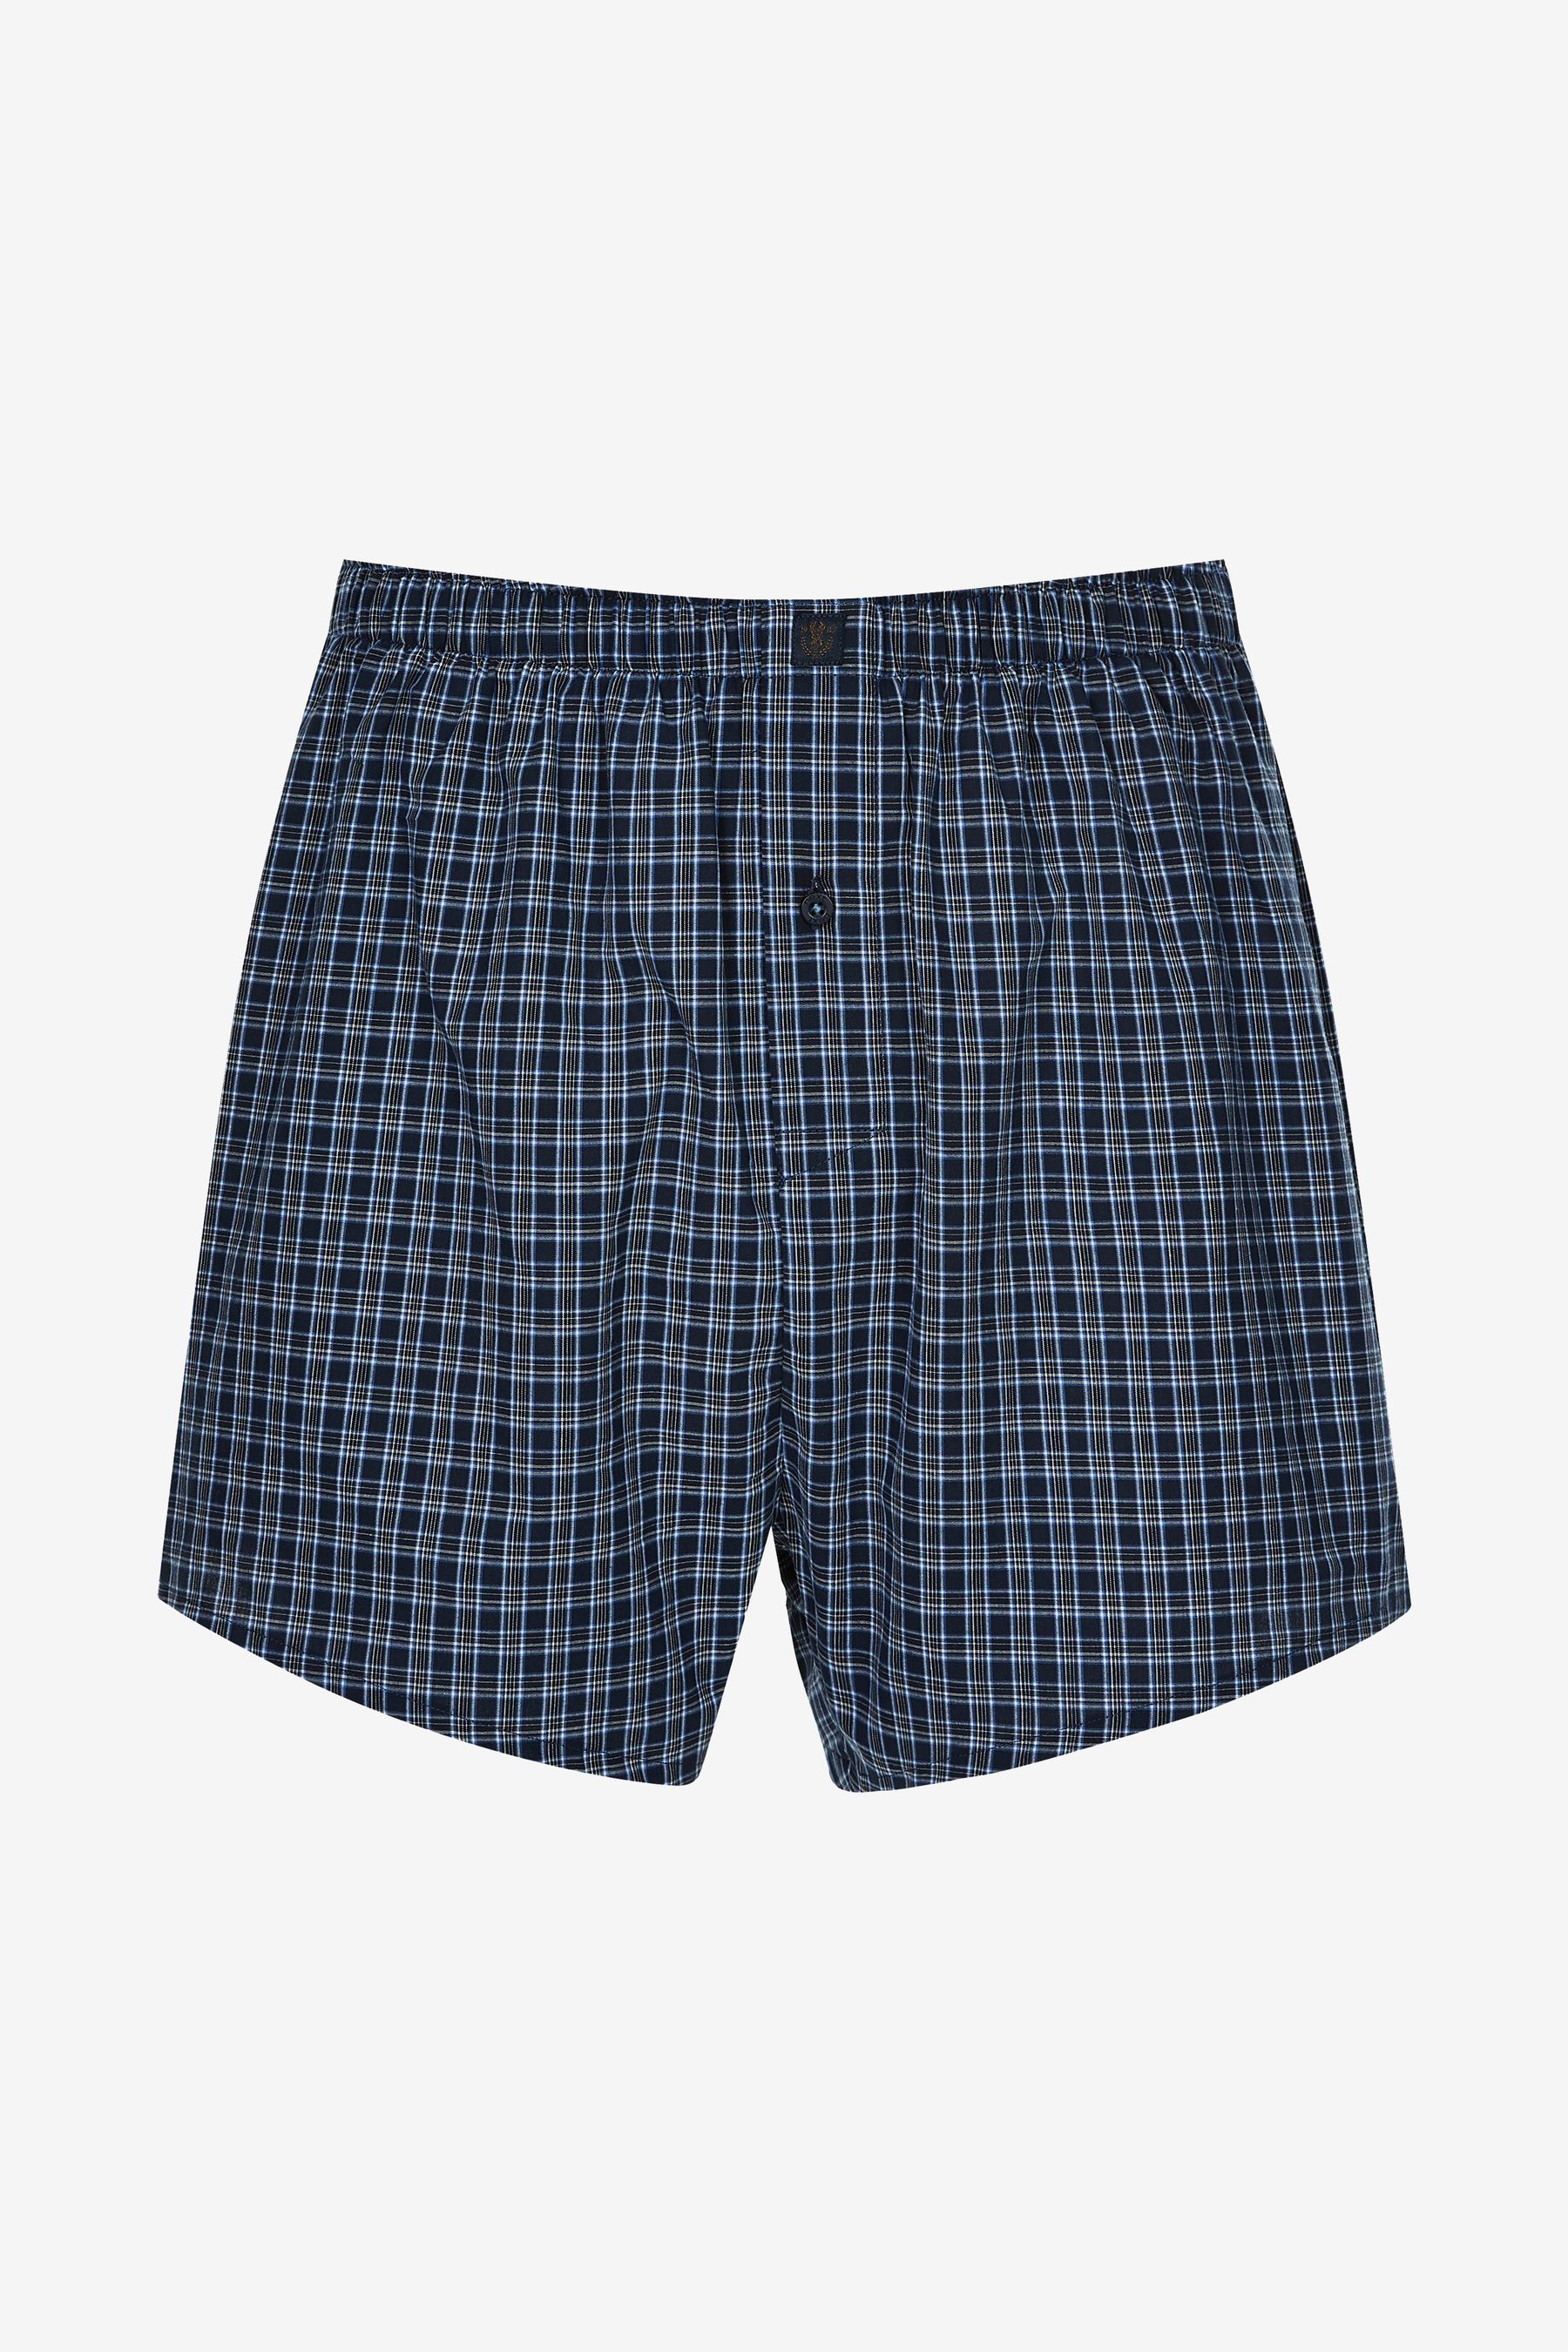 Buy Pattern Woven Pure Cotton Boxers from Next Australia